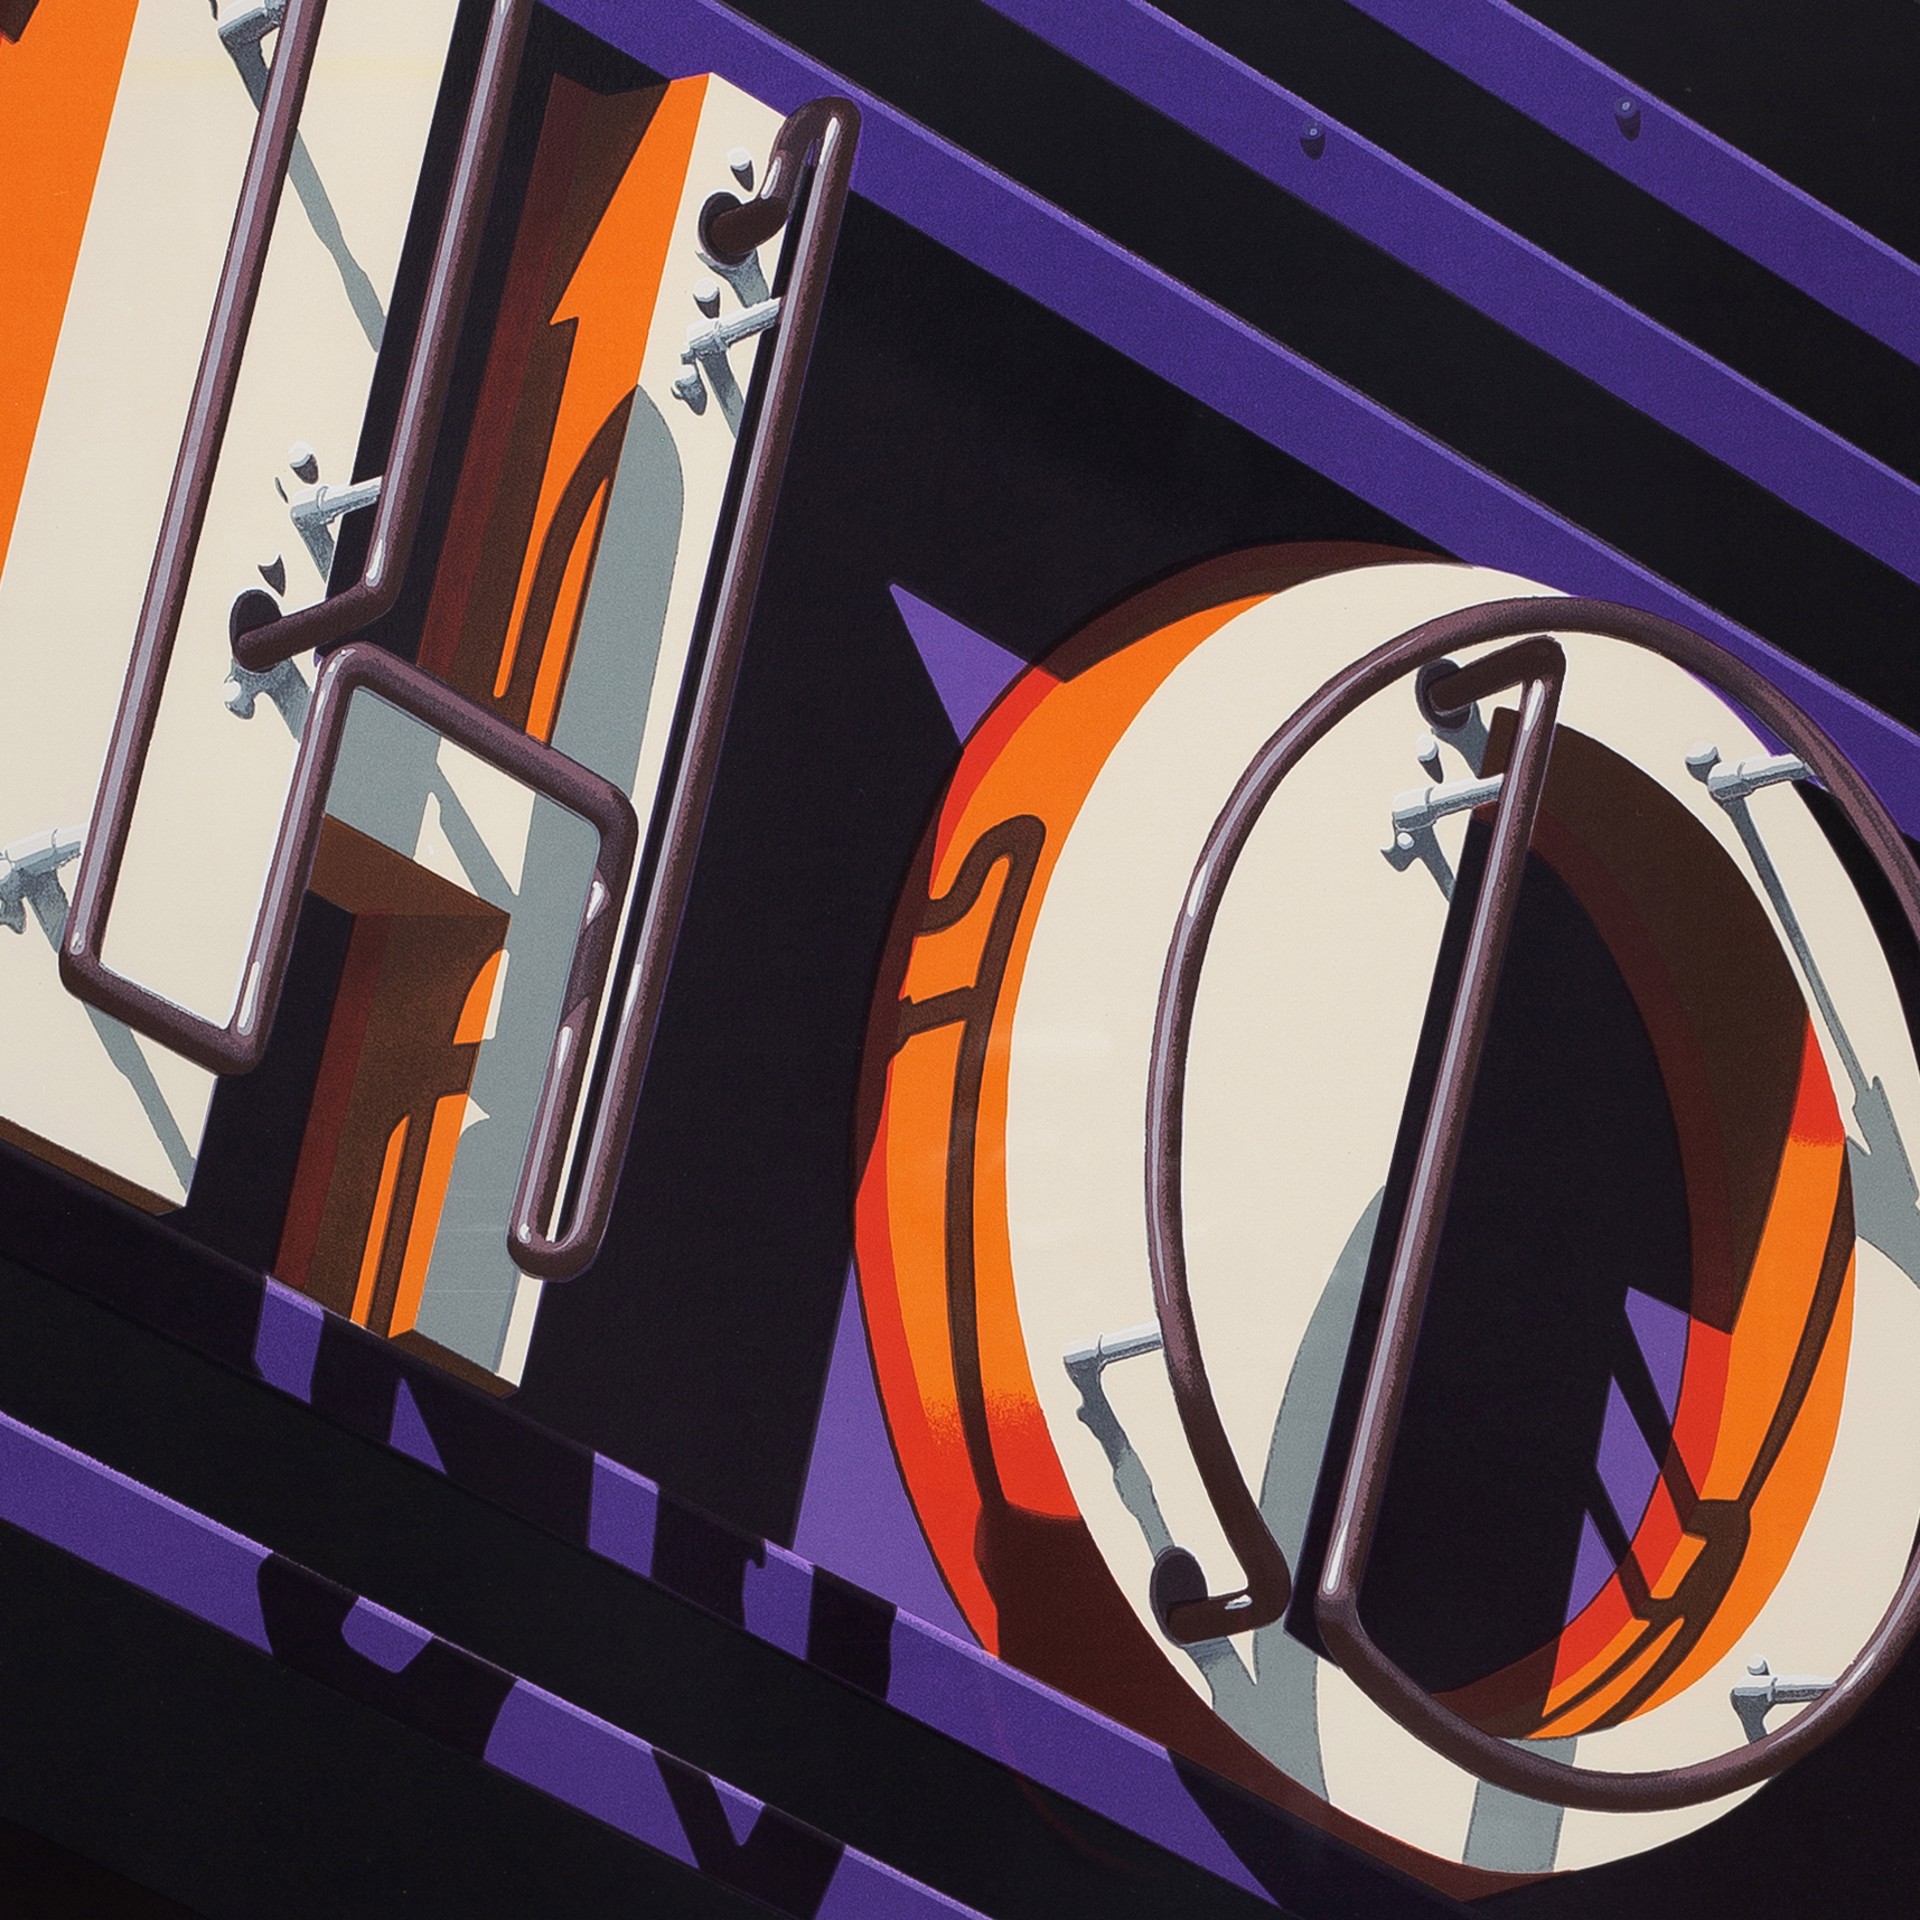 Hot (from American Signs portfolio) by Robert Cottingham